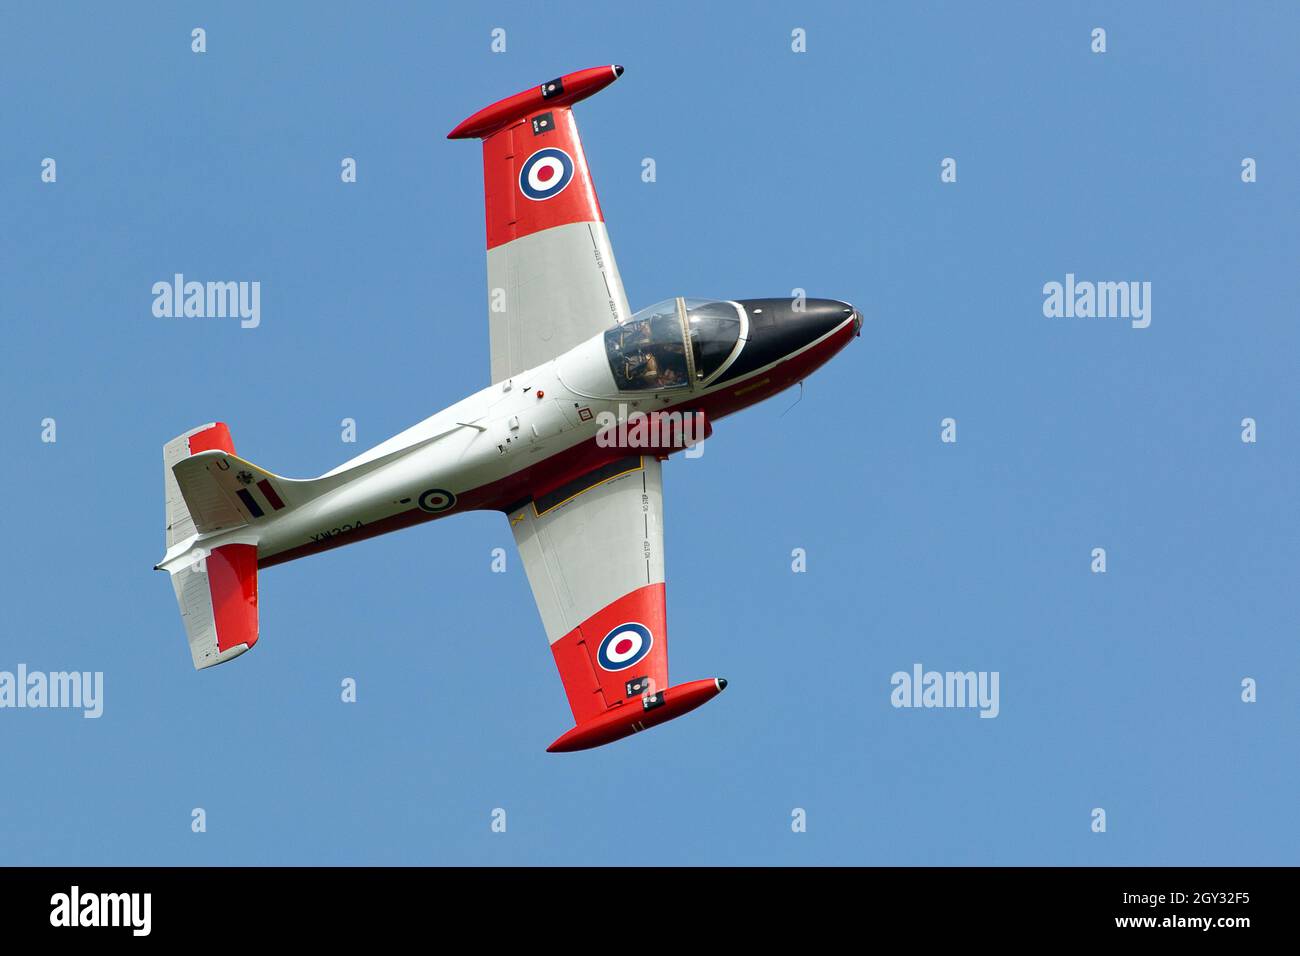 Royal Air Force RAF Jet Provost Trainer at Abingdon Airshow Stock Photo